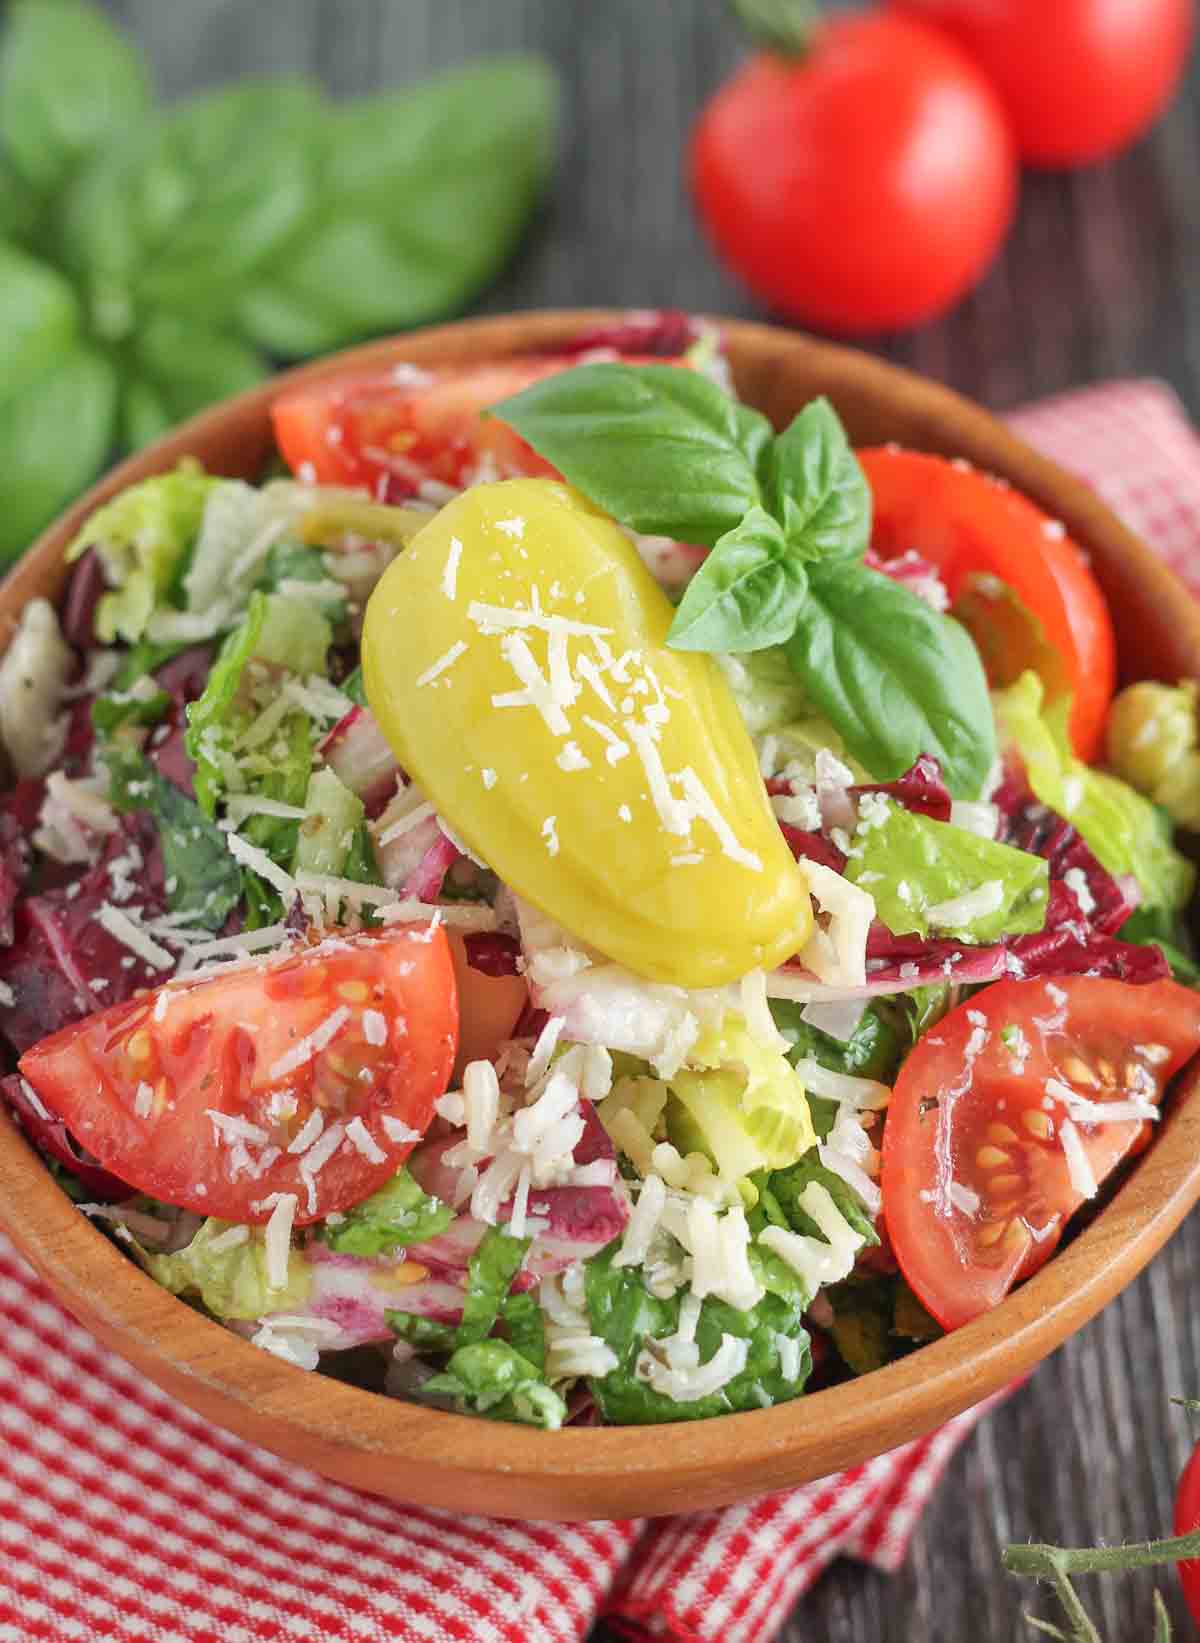 Italian Cold Rice Salad in a wooden bowl